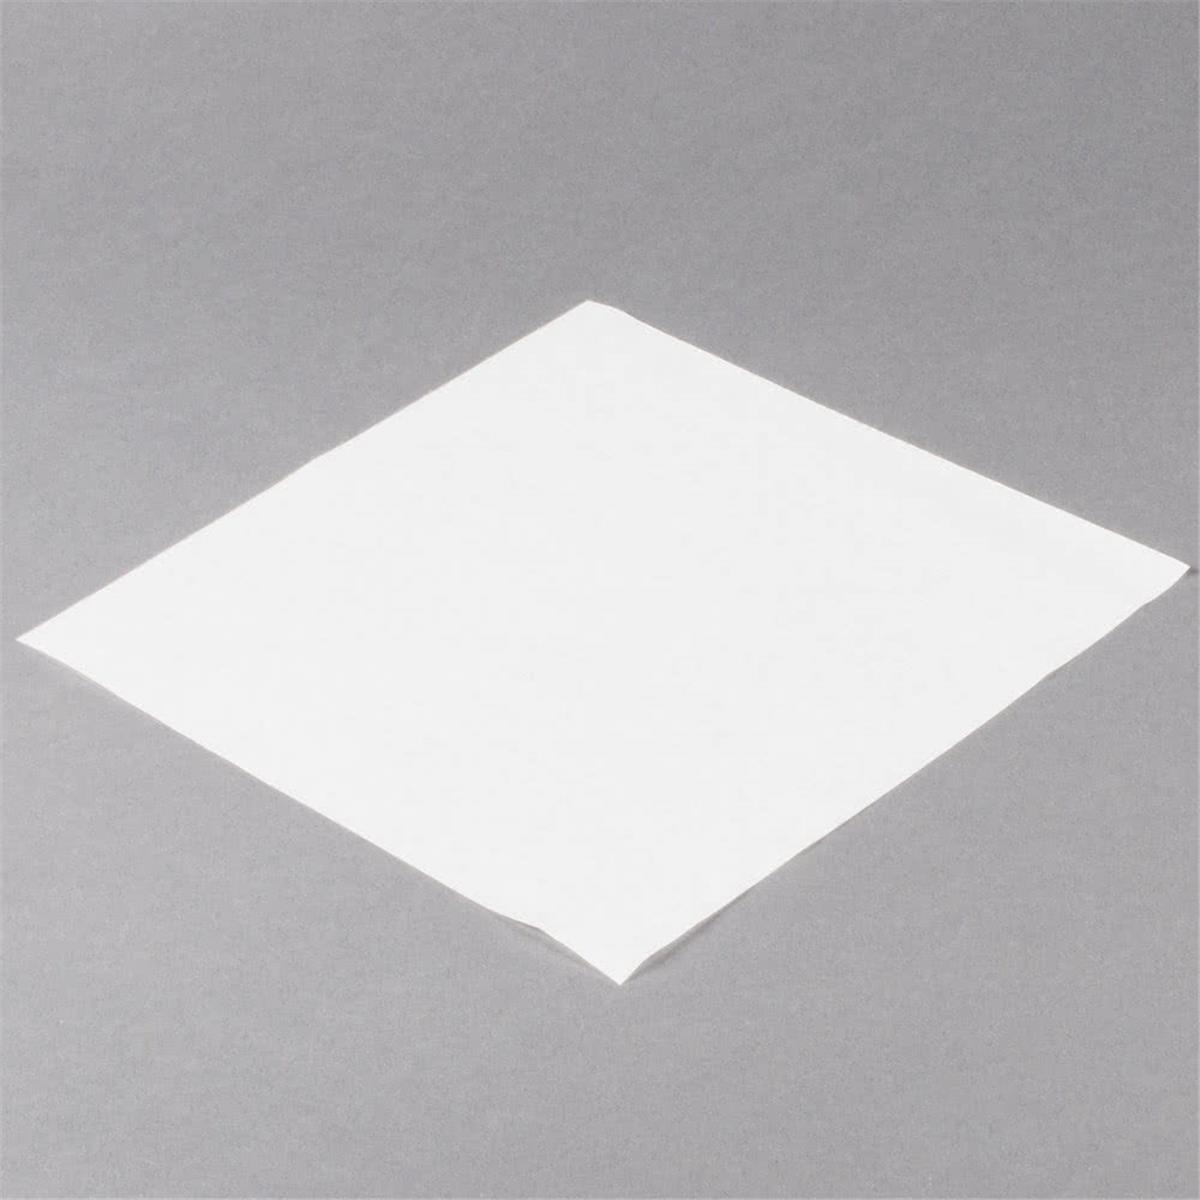 1215wet Cpc 12 X 15 In. Wet Wax Sheets, White - Case Of 5